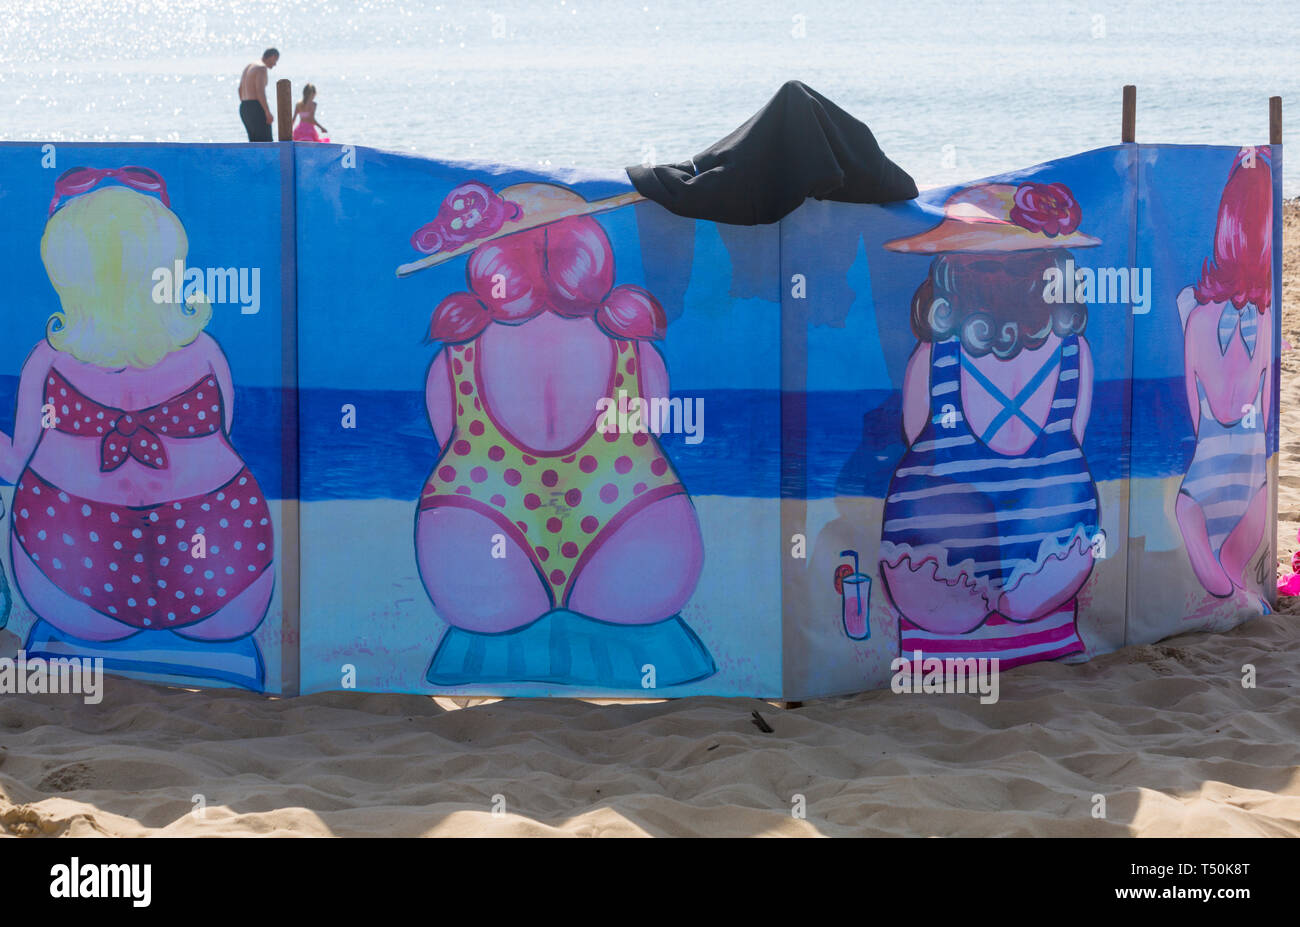 Bournemouth, Dorset, UK. 20th Apr, 2019. UK weather: hot and sunny as visitors head to the seaside to enjoy the weather at Bournemouth beaches for the Easter holidays - mid morning and already beaches are getting packed, as sunseekers get there early to get their space. Credit: Carolyn Jenkins/Alamy Live News Stock Photo